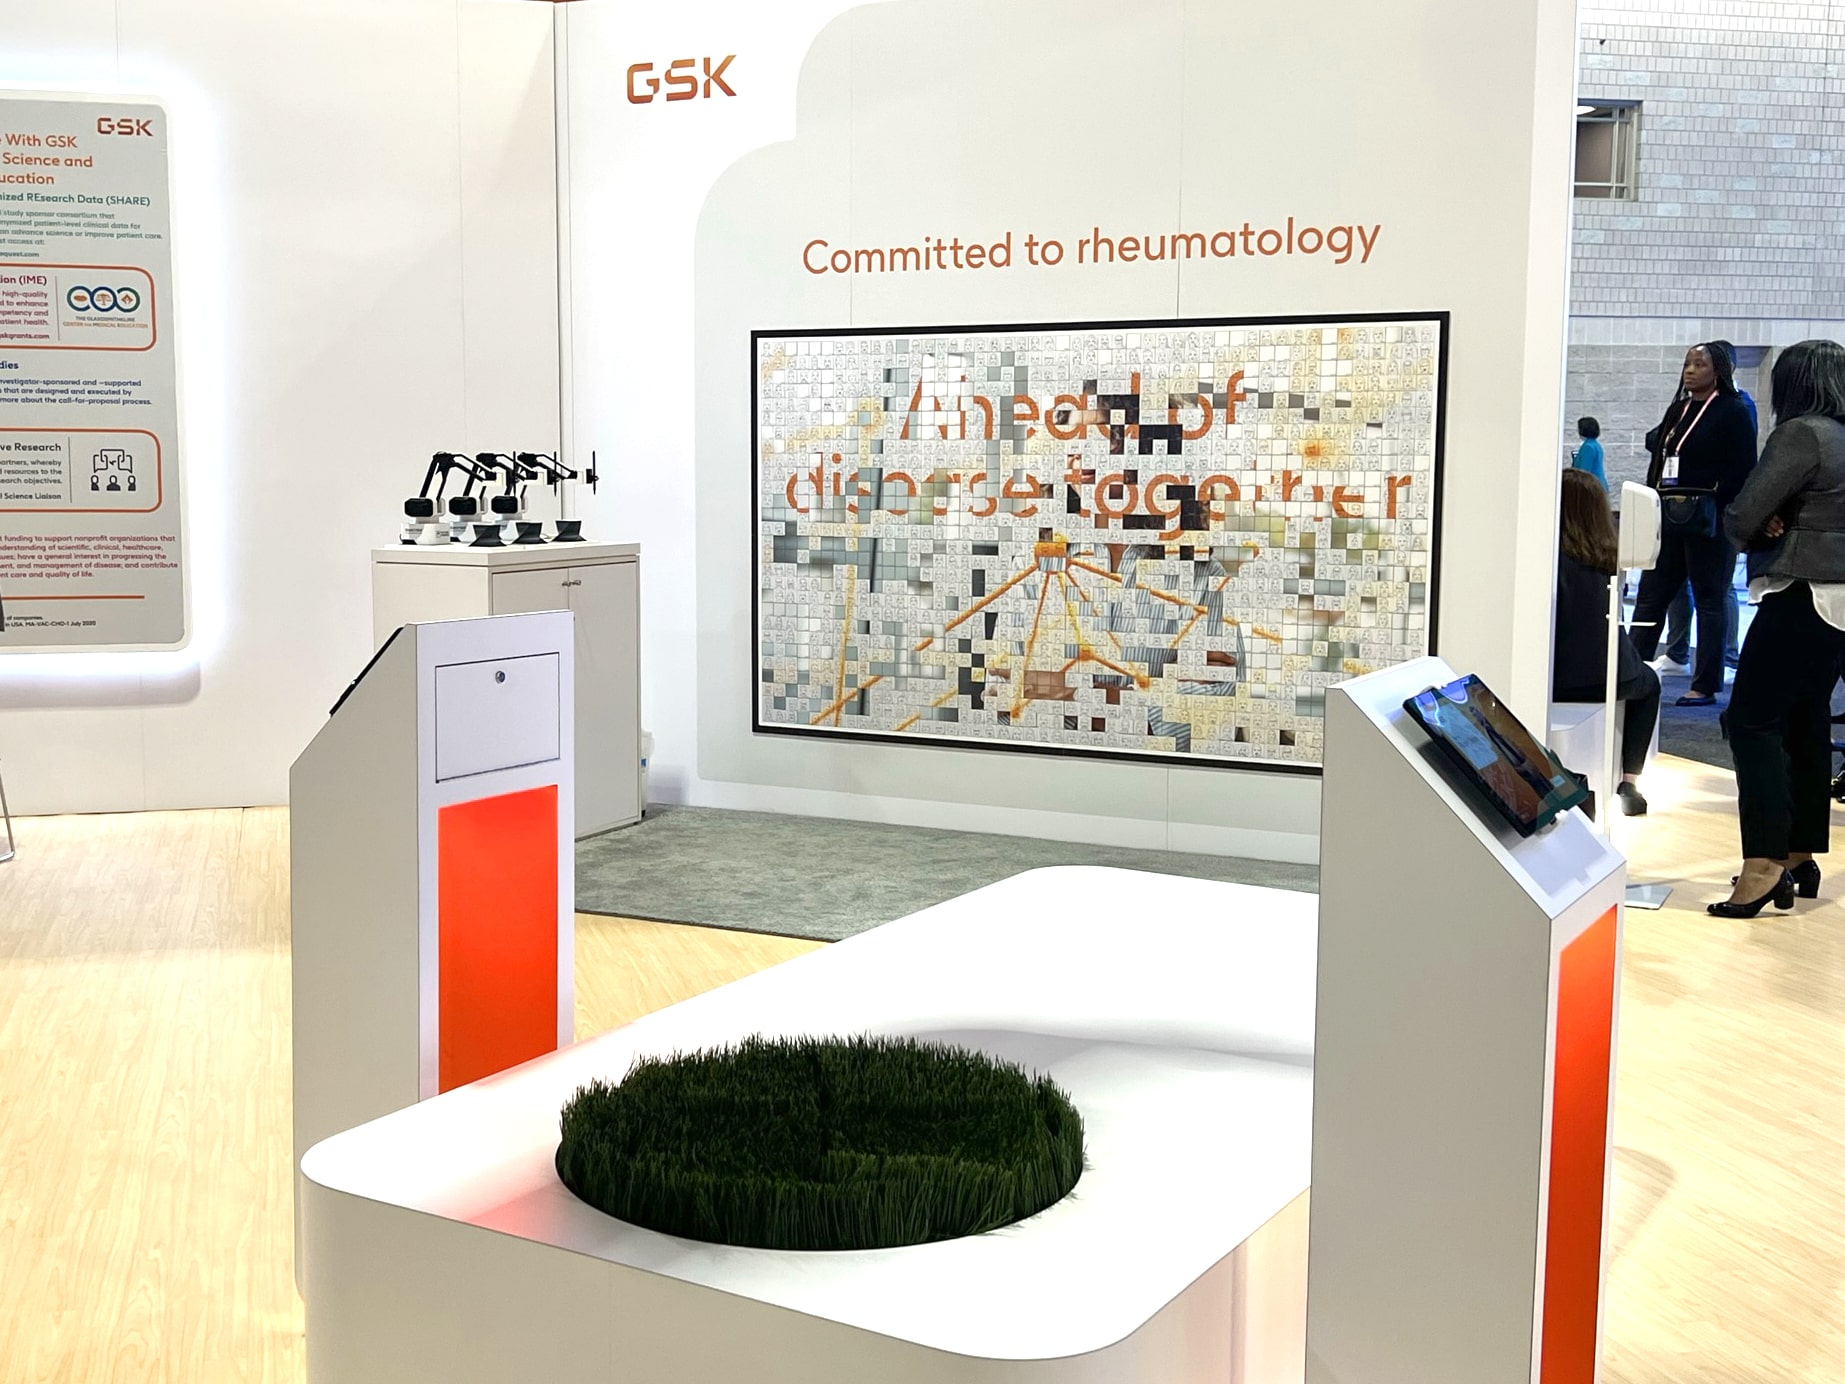 Live Sketch Mosaic: GSK at ACR